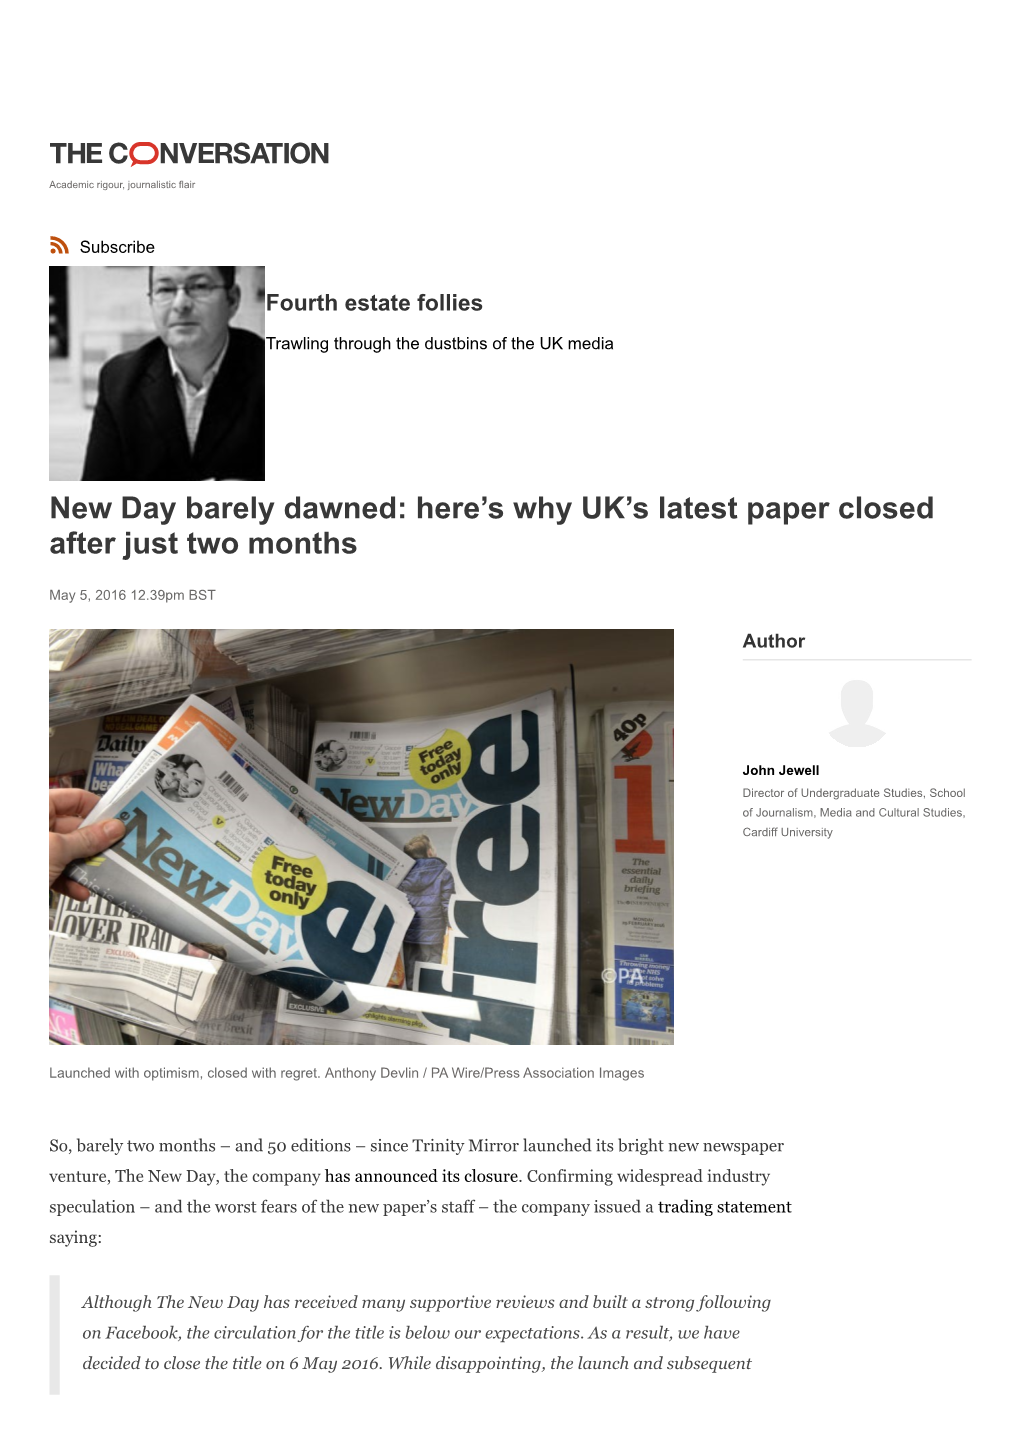 New Day Barely Dawned: Here's Why UK's Latest Paper Closed Afte